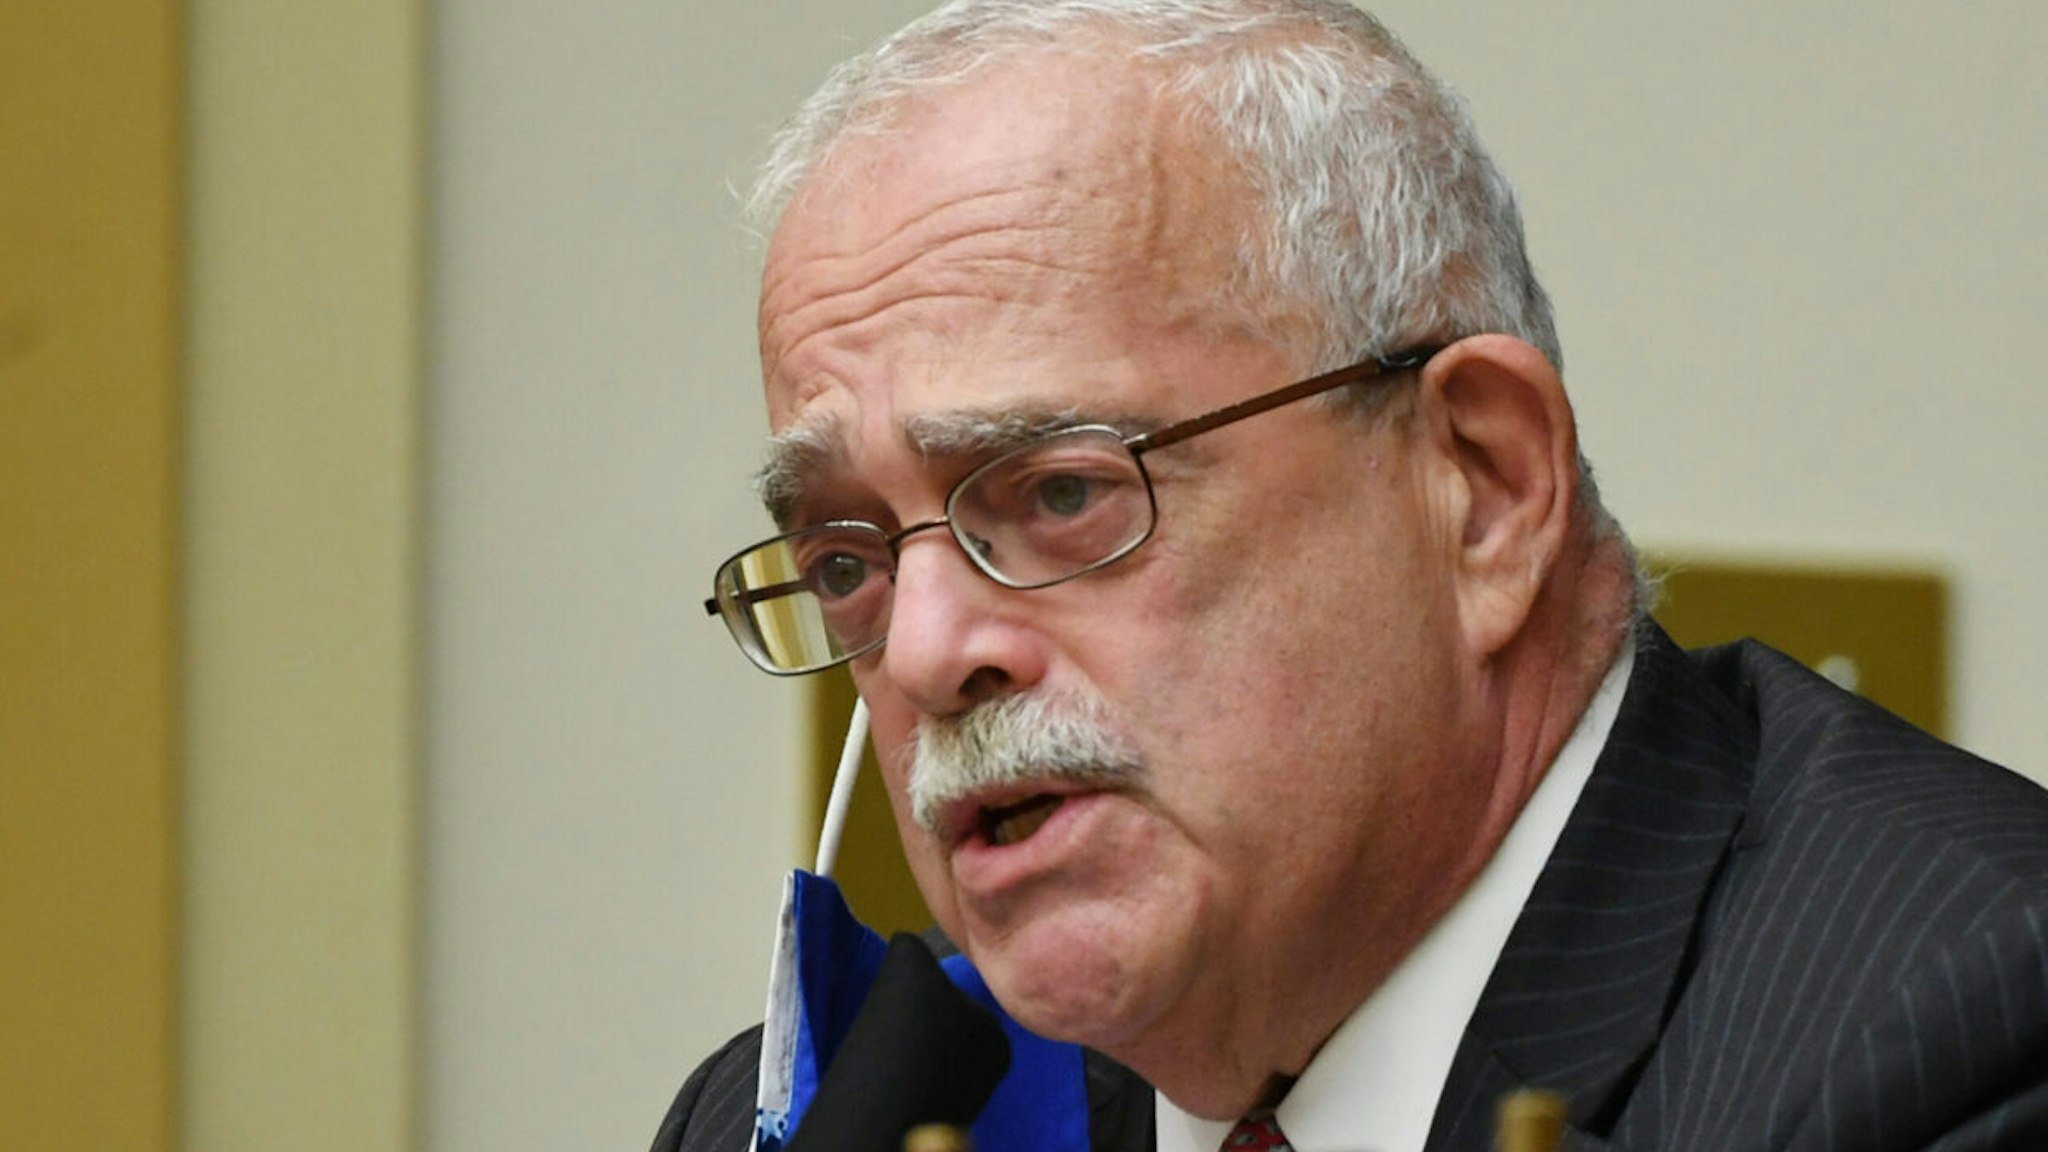 Gerry Connolly, questions witnesses during a House Committee on Foreign Affairs hearing looking into the firing of State Department Inspector General Steven Linick, on Capitol Hill in Washington, DC on September 16, 2020.